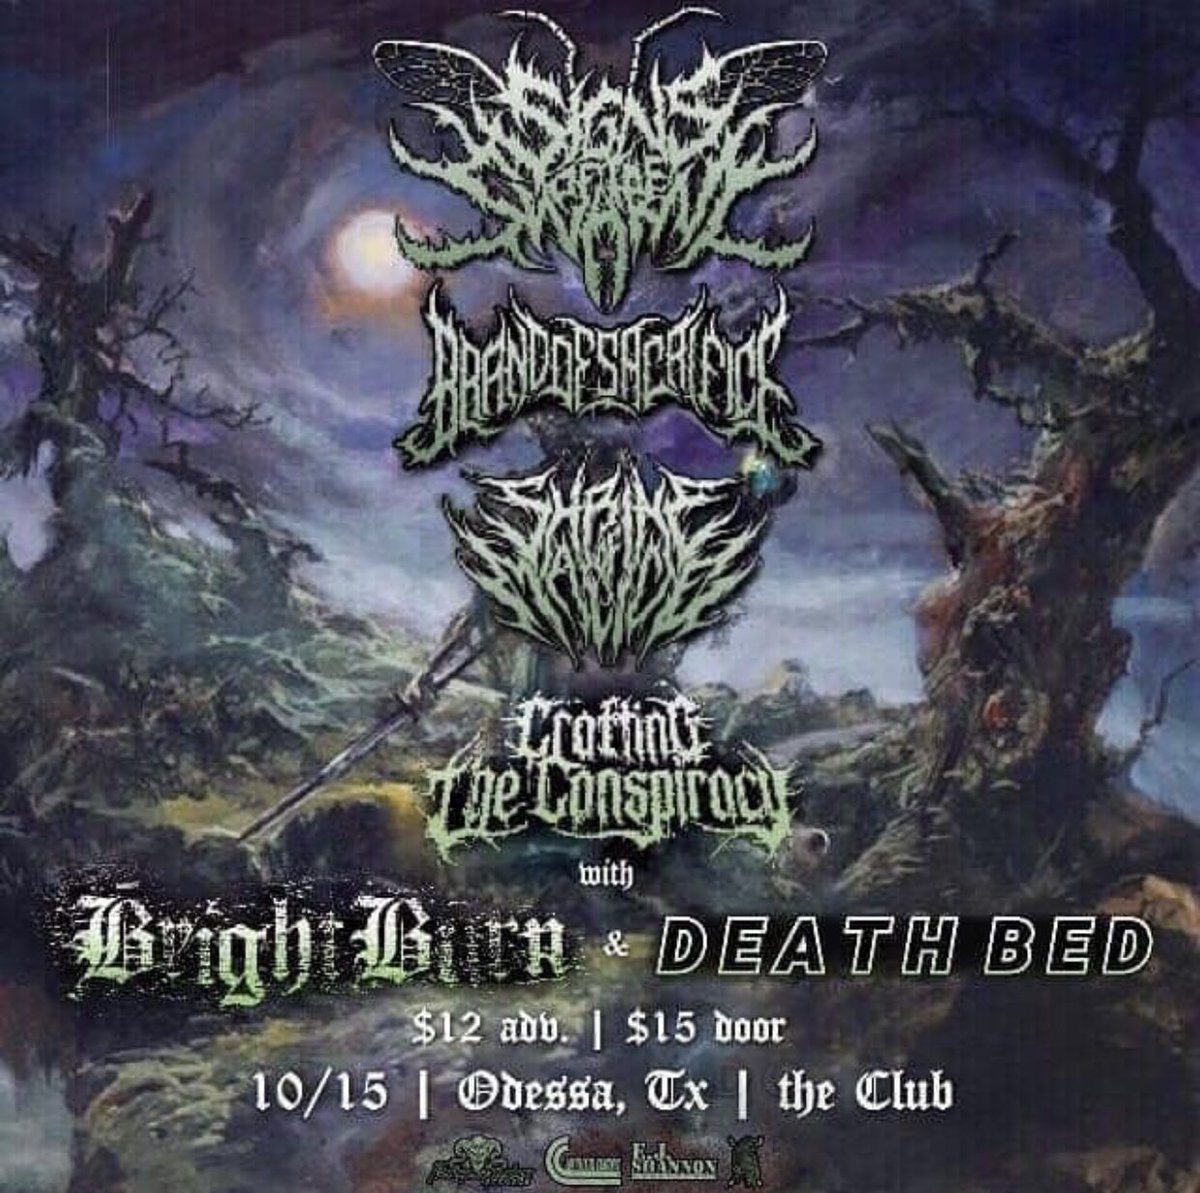 Tour with @signsoftheswarm starts tomorrow! First show ever is in Odessa, Texas with @BOSdeathmetal and @CTCbandofficial!!!
Shrine Is A Cult. 
#signsoftheswarm
#vitaldeprivation
#uniqueleaderrecords
#shrineofmalice
#sheol
#mortusviventi
#brandofsacrifice